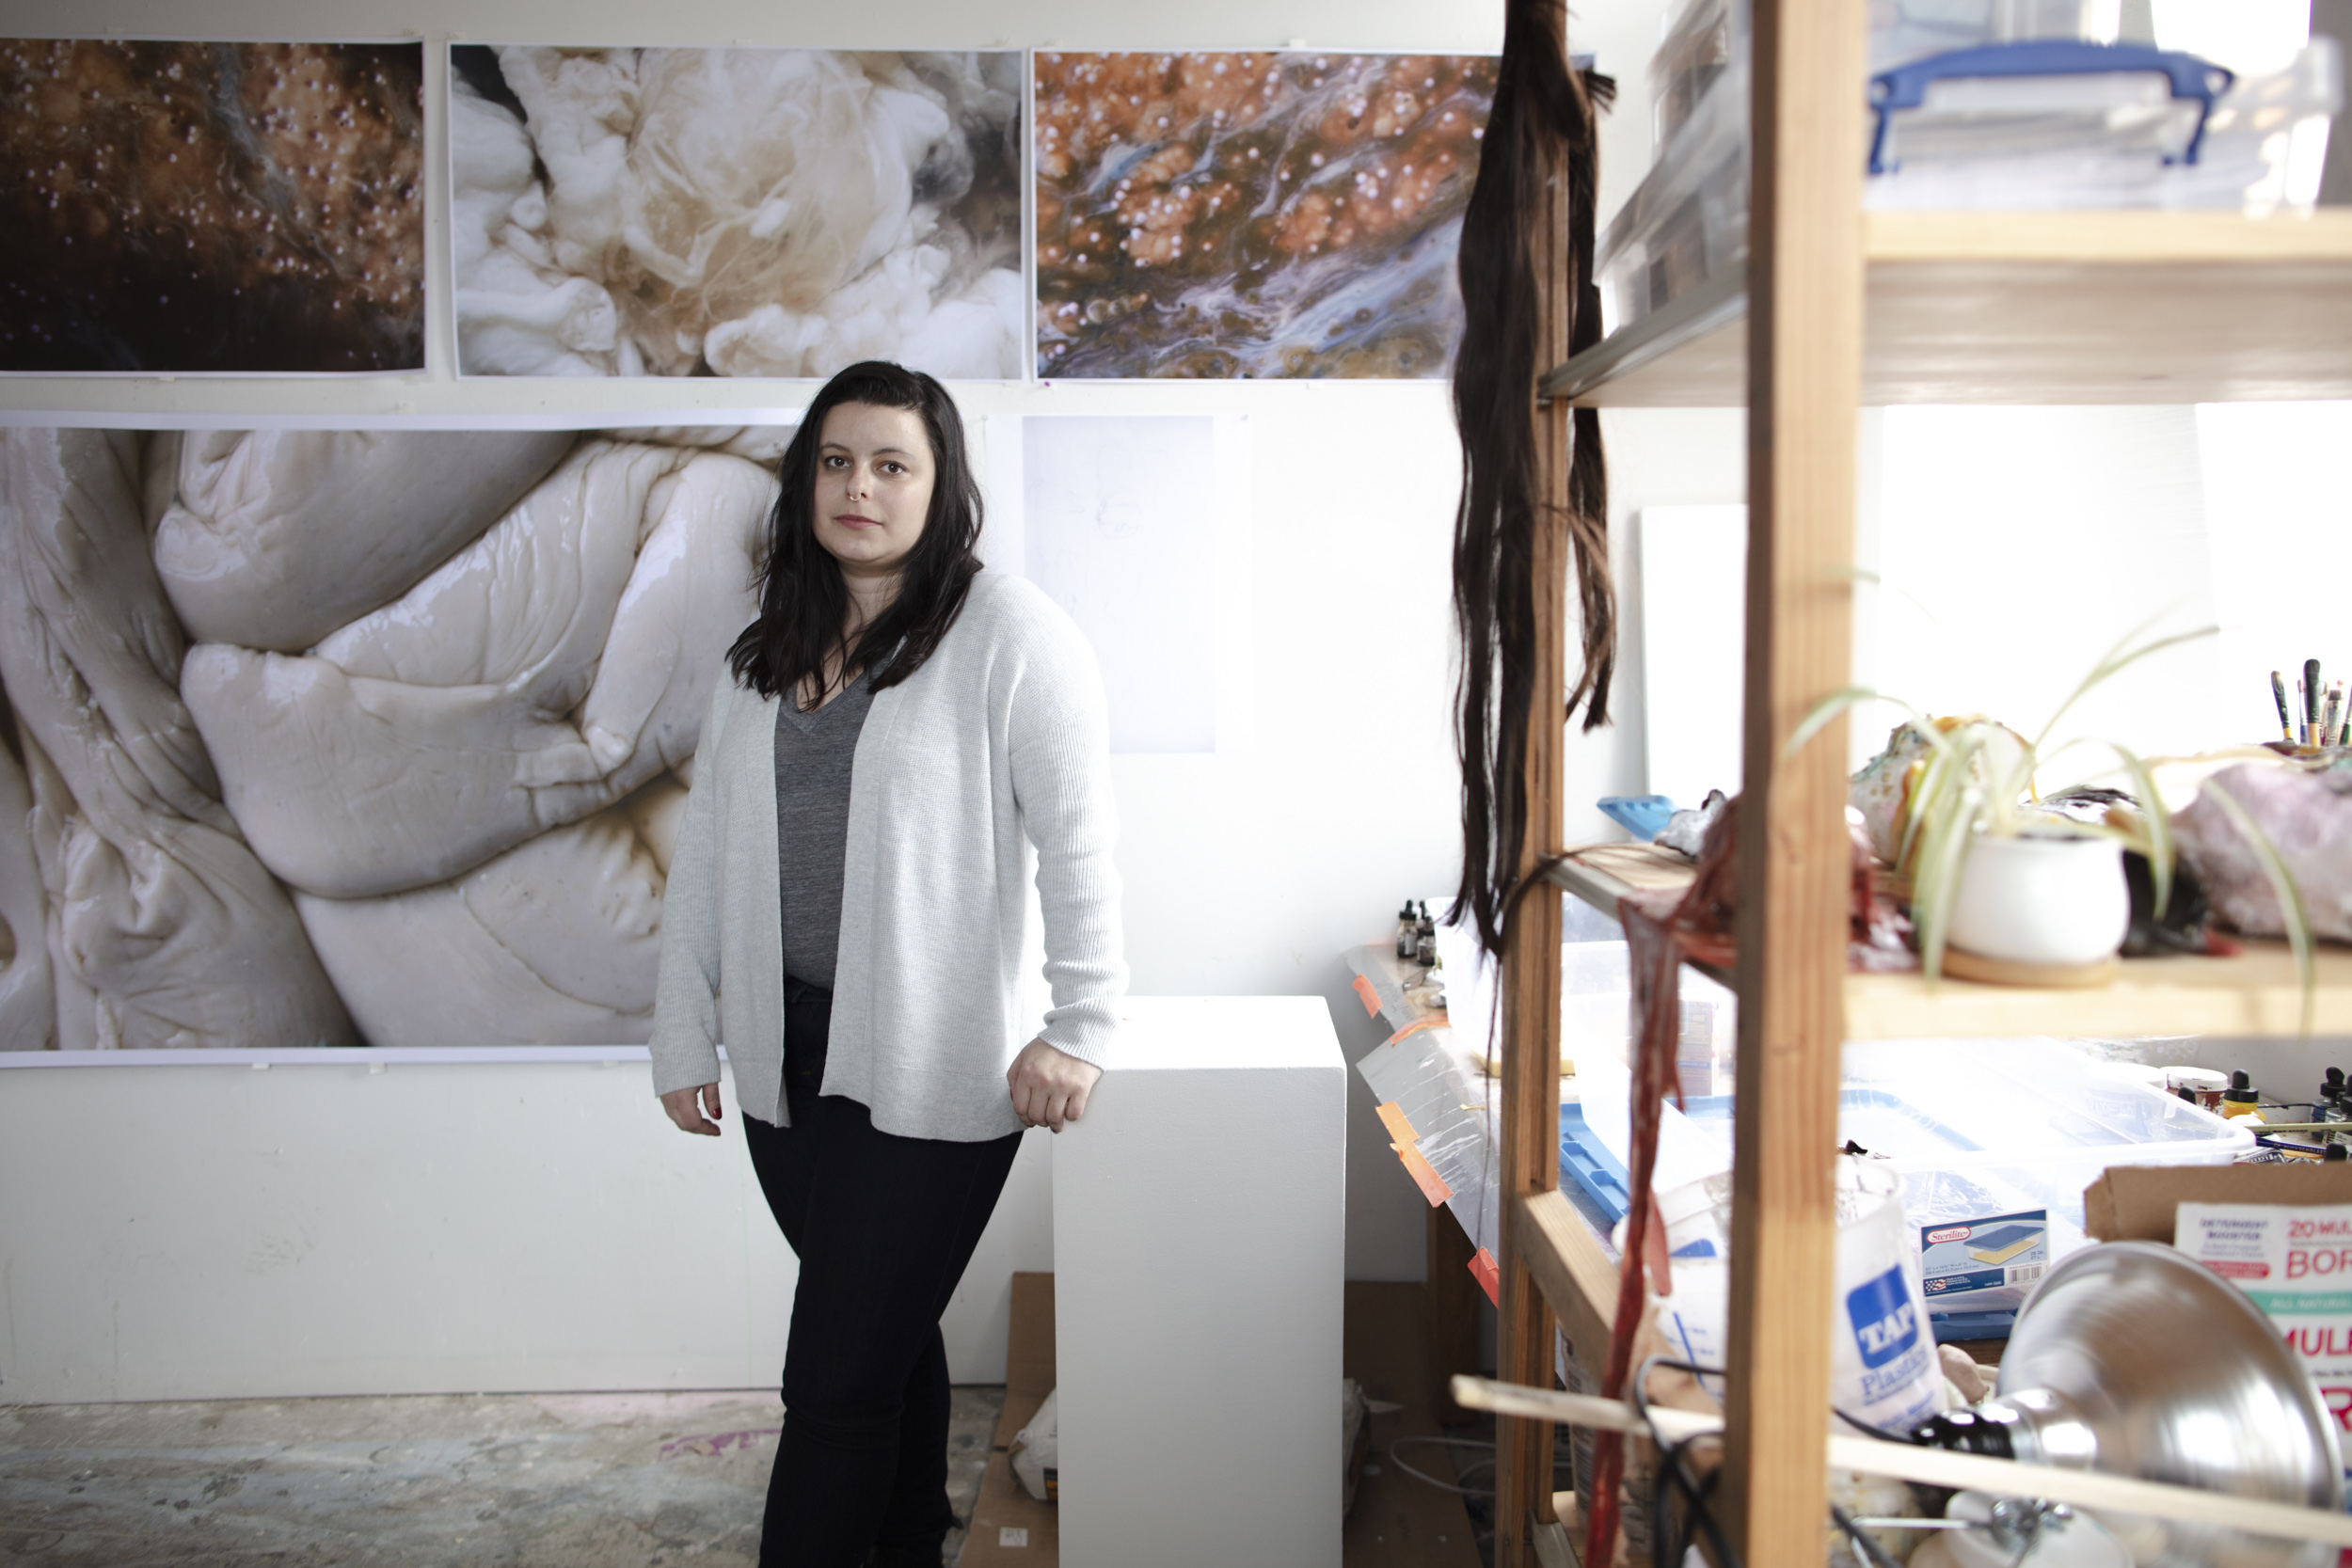 Graduate student Samantha Ollstein standing in her studio surrounded by her artwork